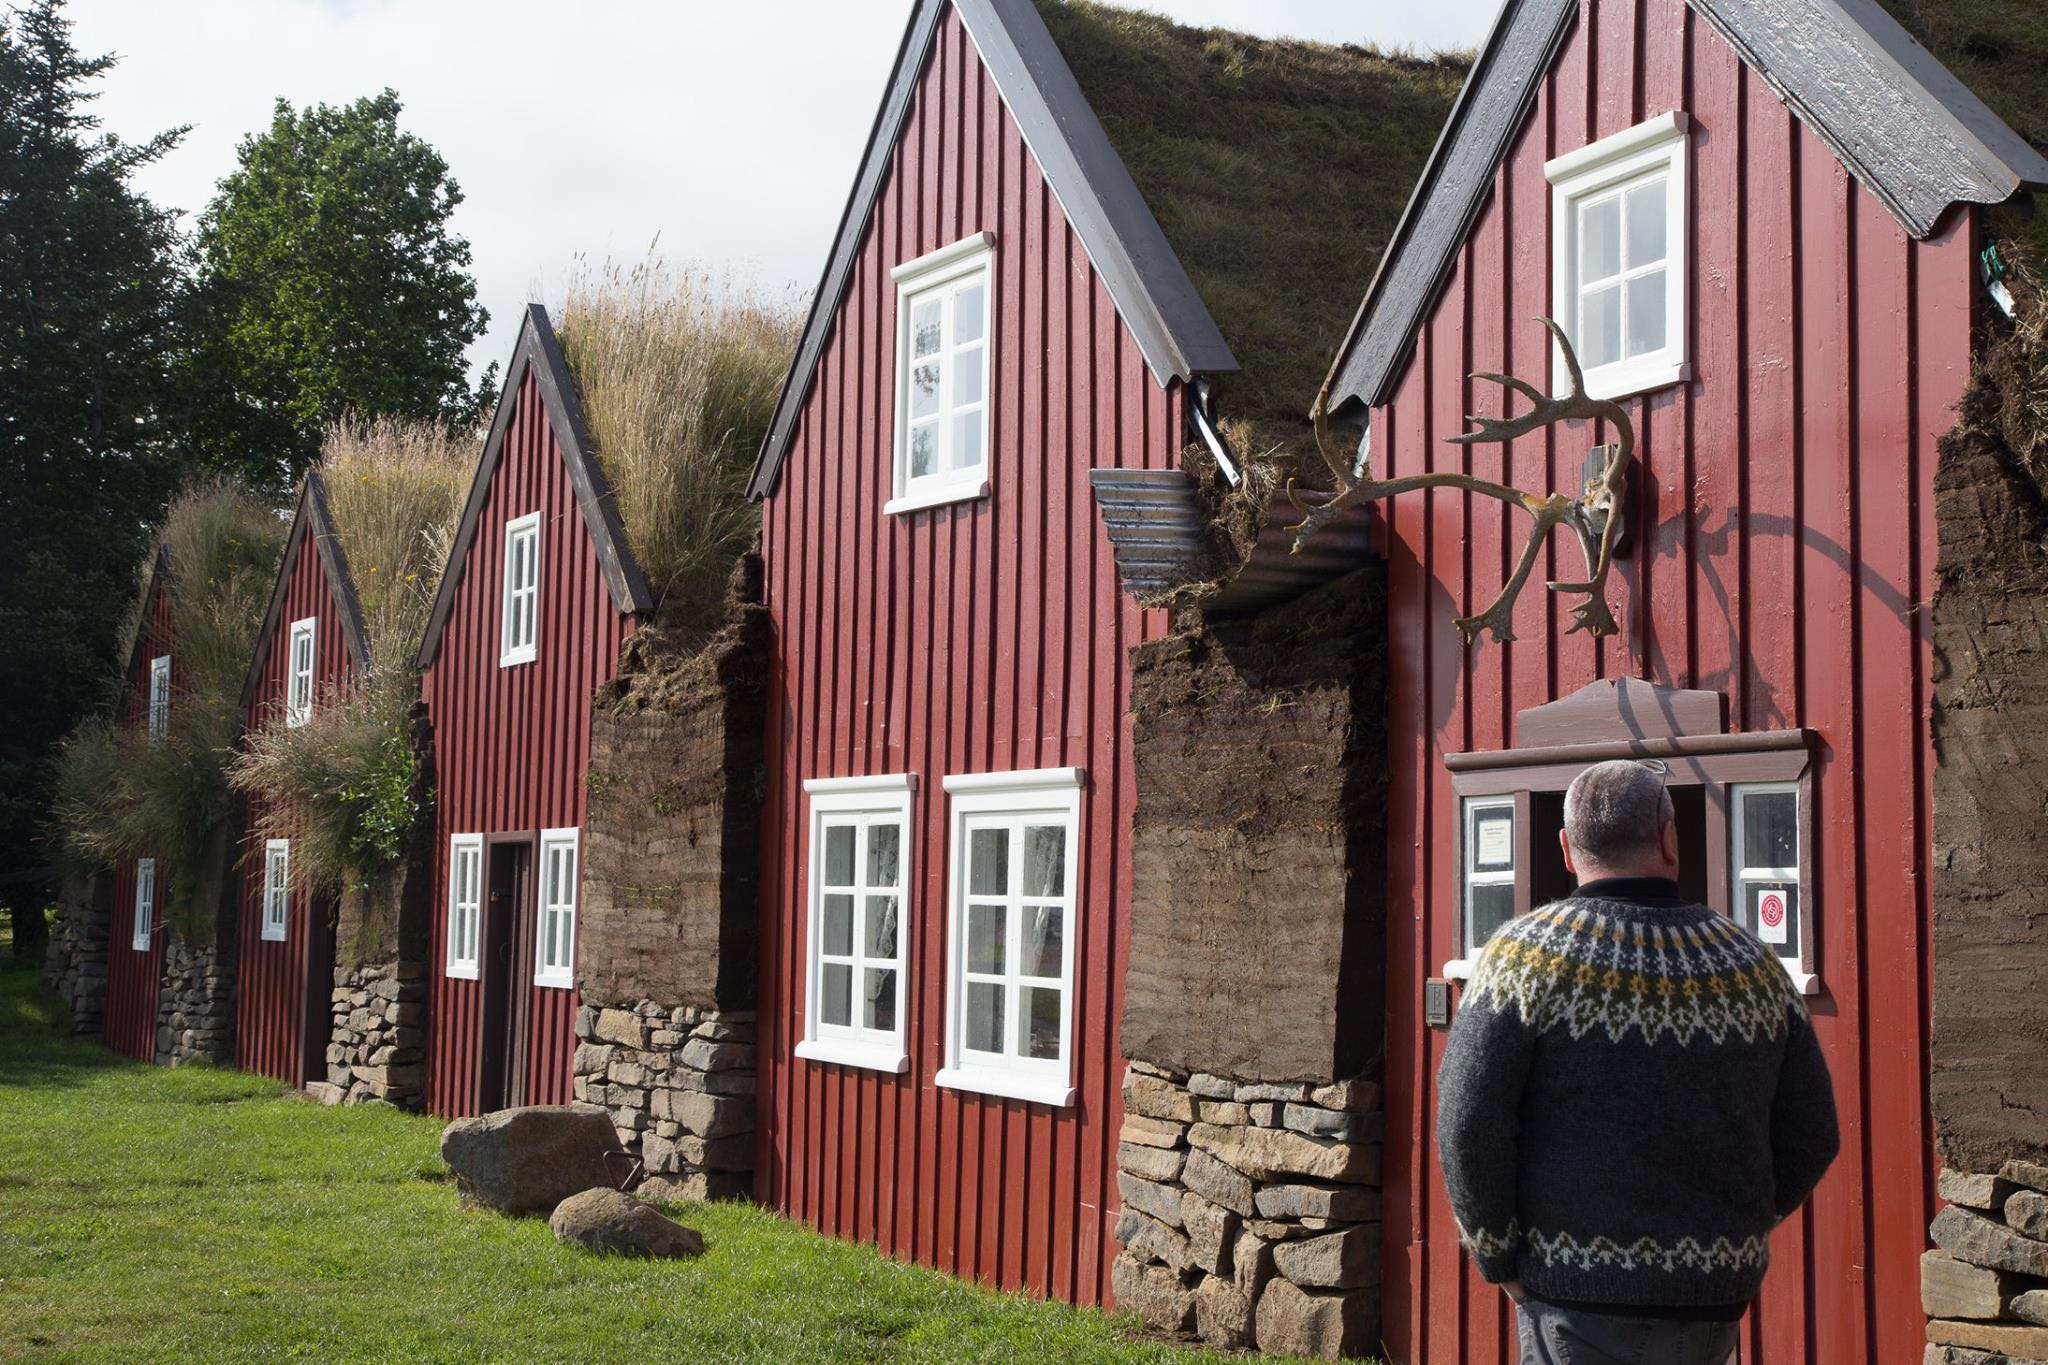 A woman standing in front of a row of red houses in Iceland